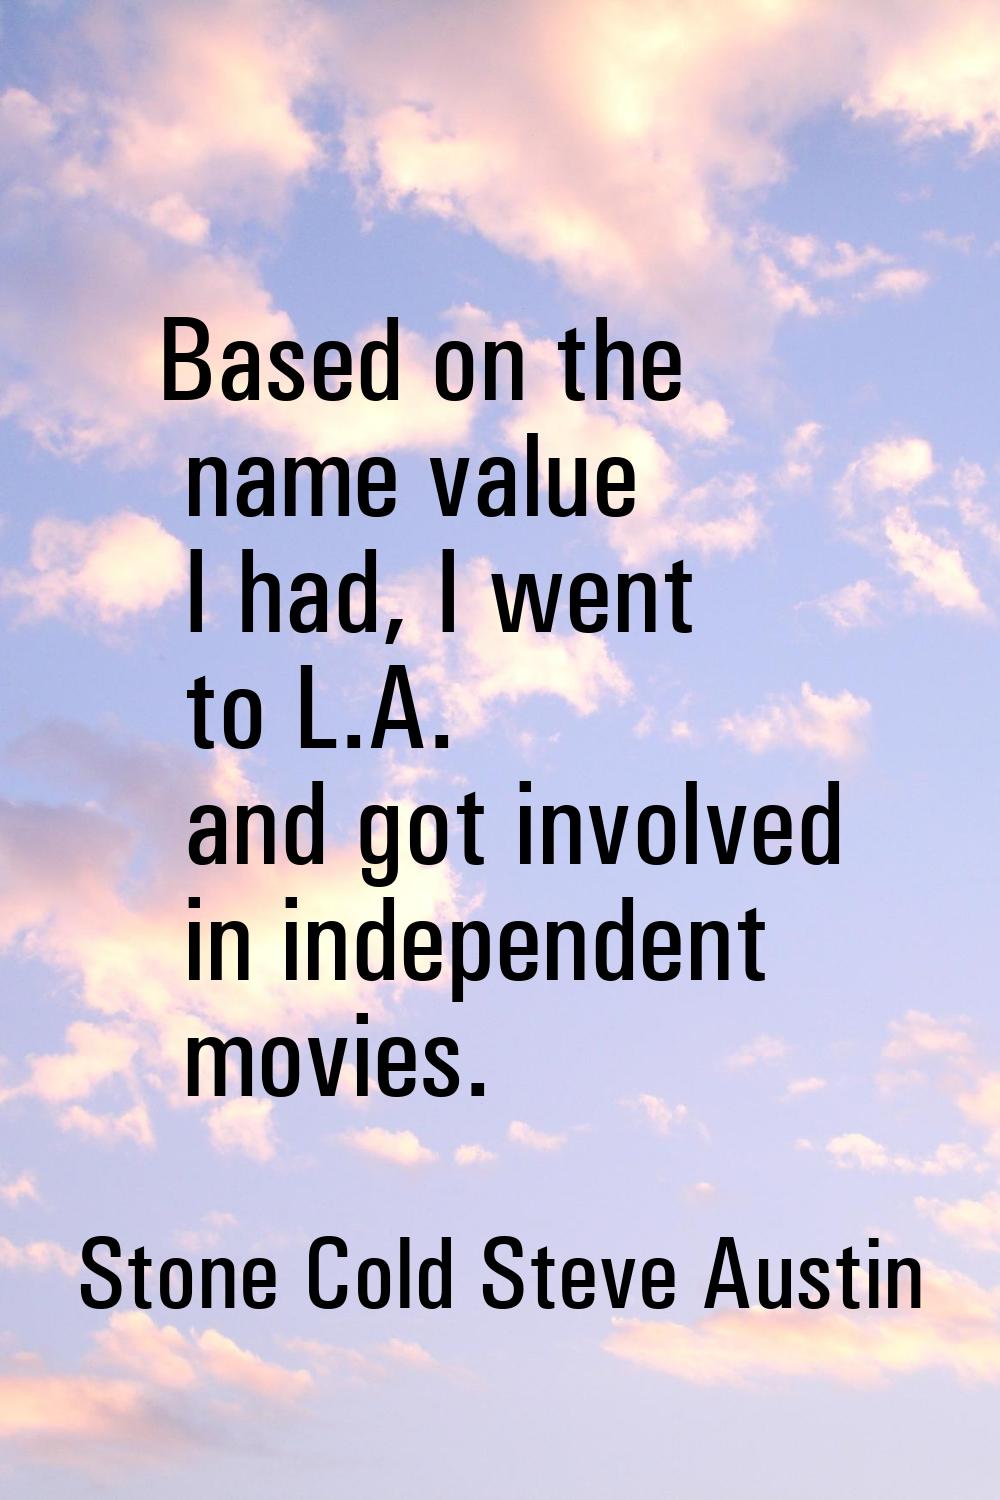 Based on the name value I had, I went to L.A. and got involved in independent movies.